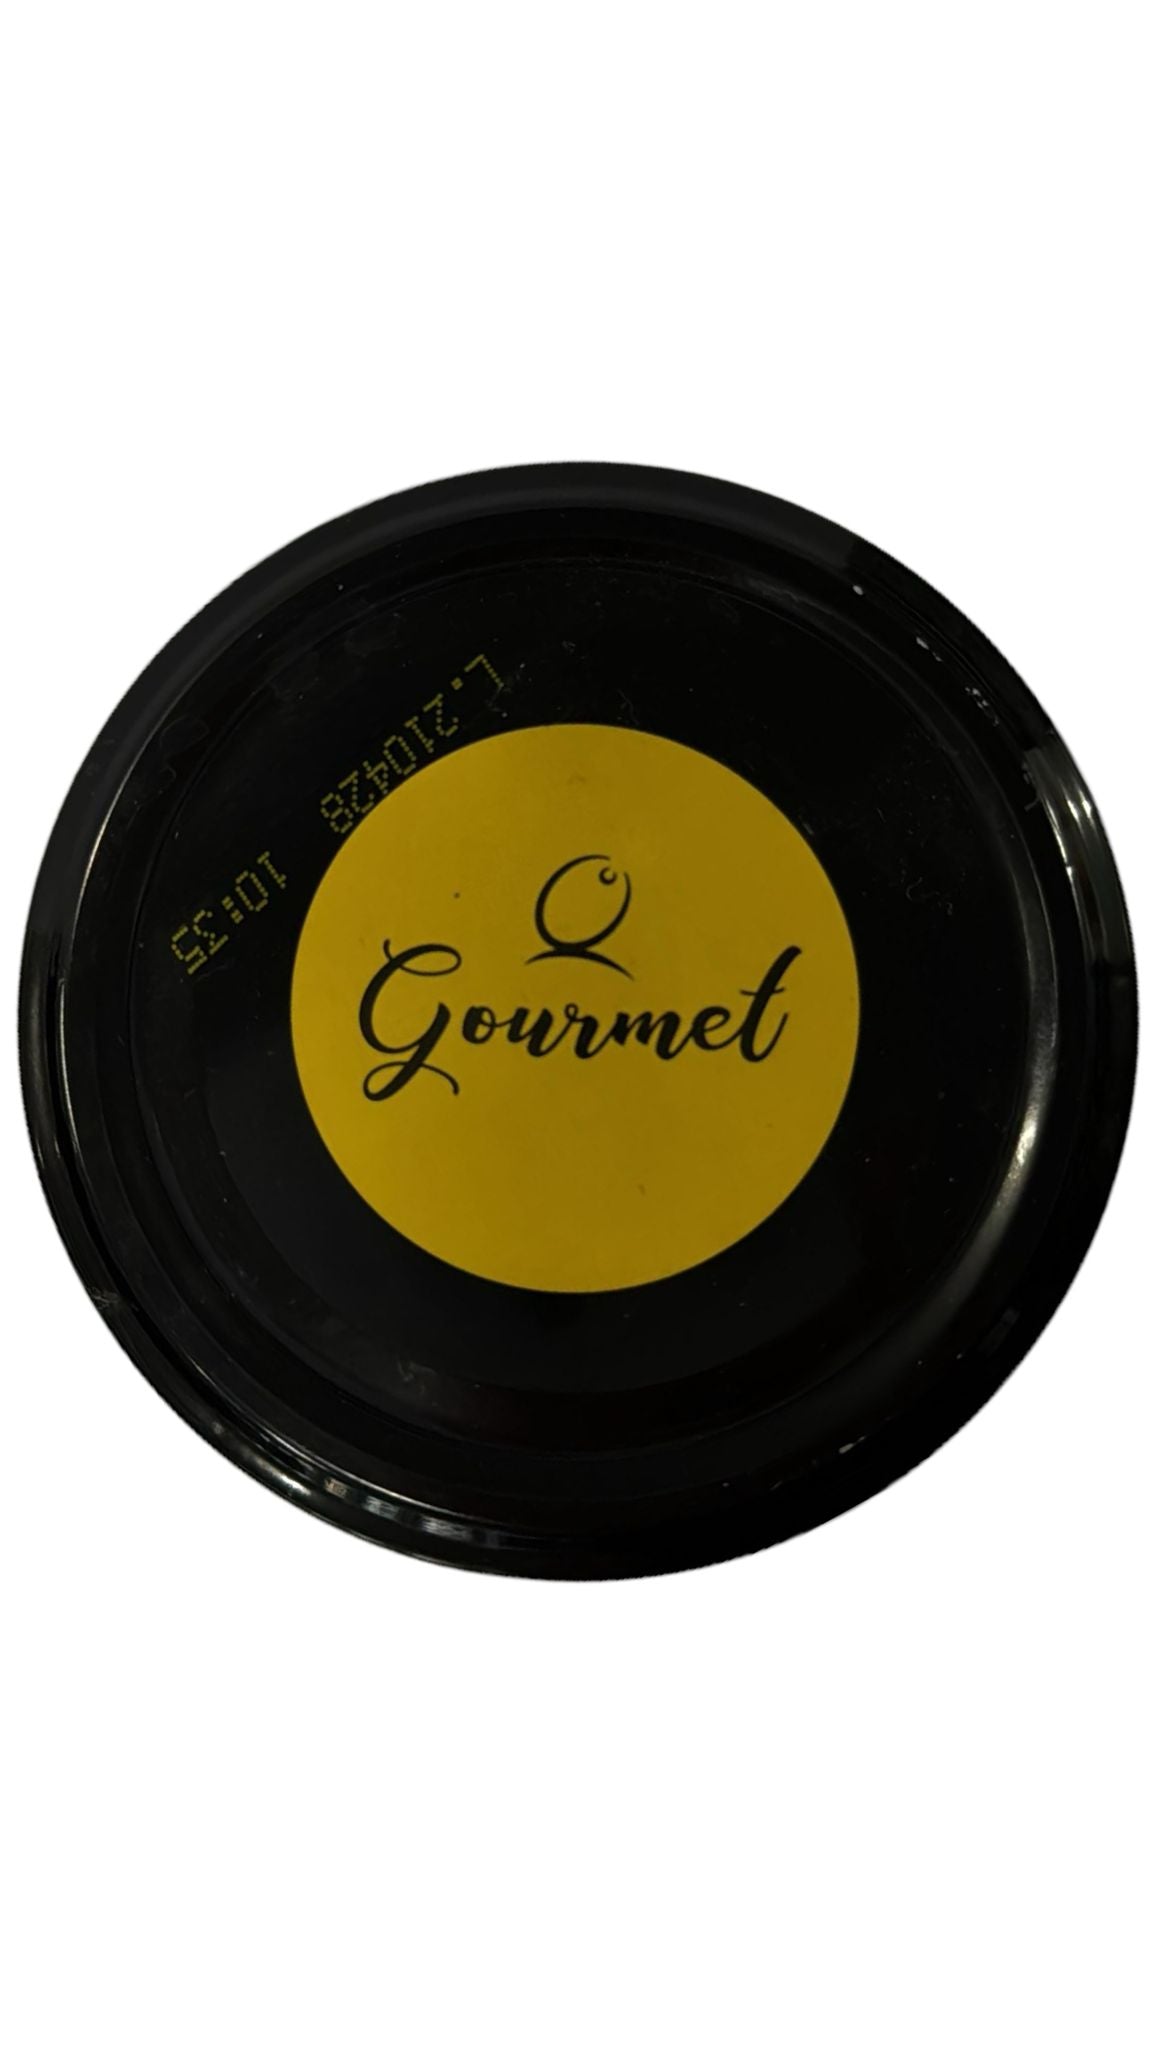 Bernal Especialades Aceitunas Aragon Olives 250g Best Before End of April 2025